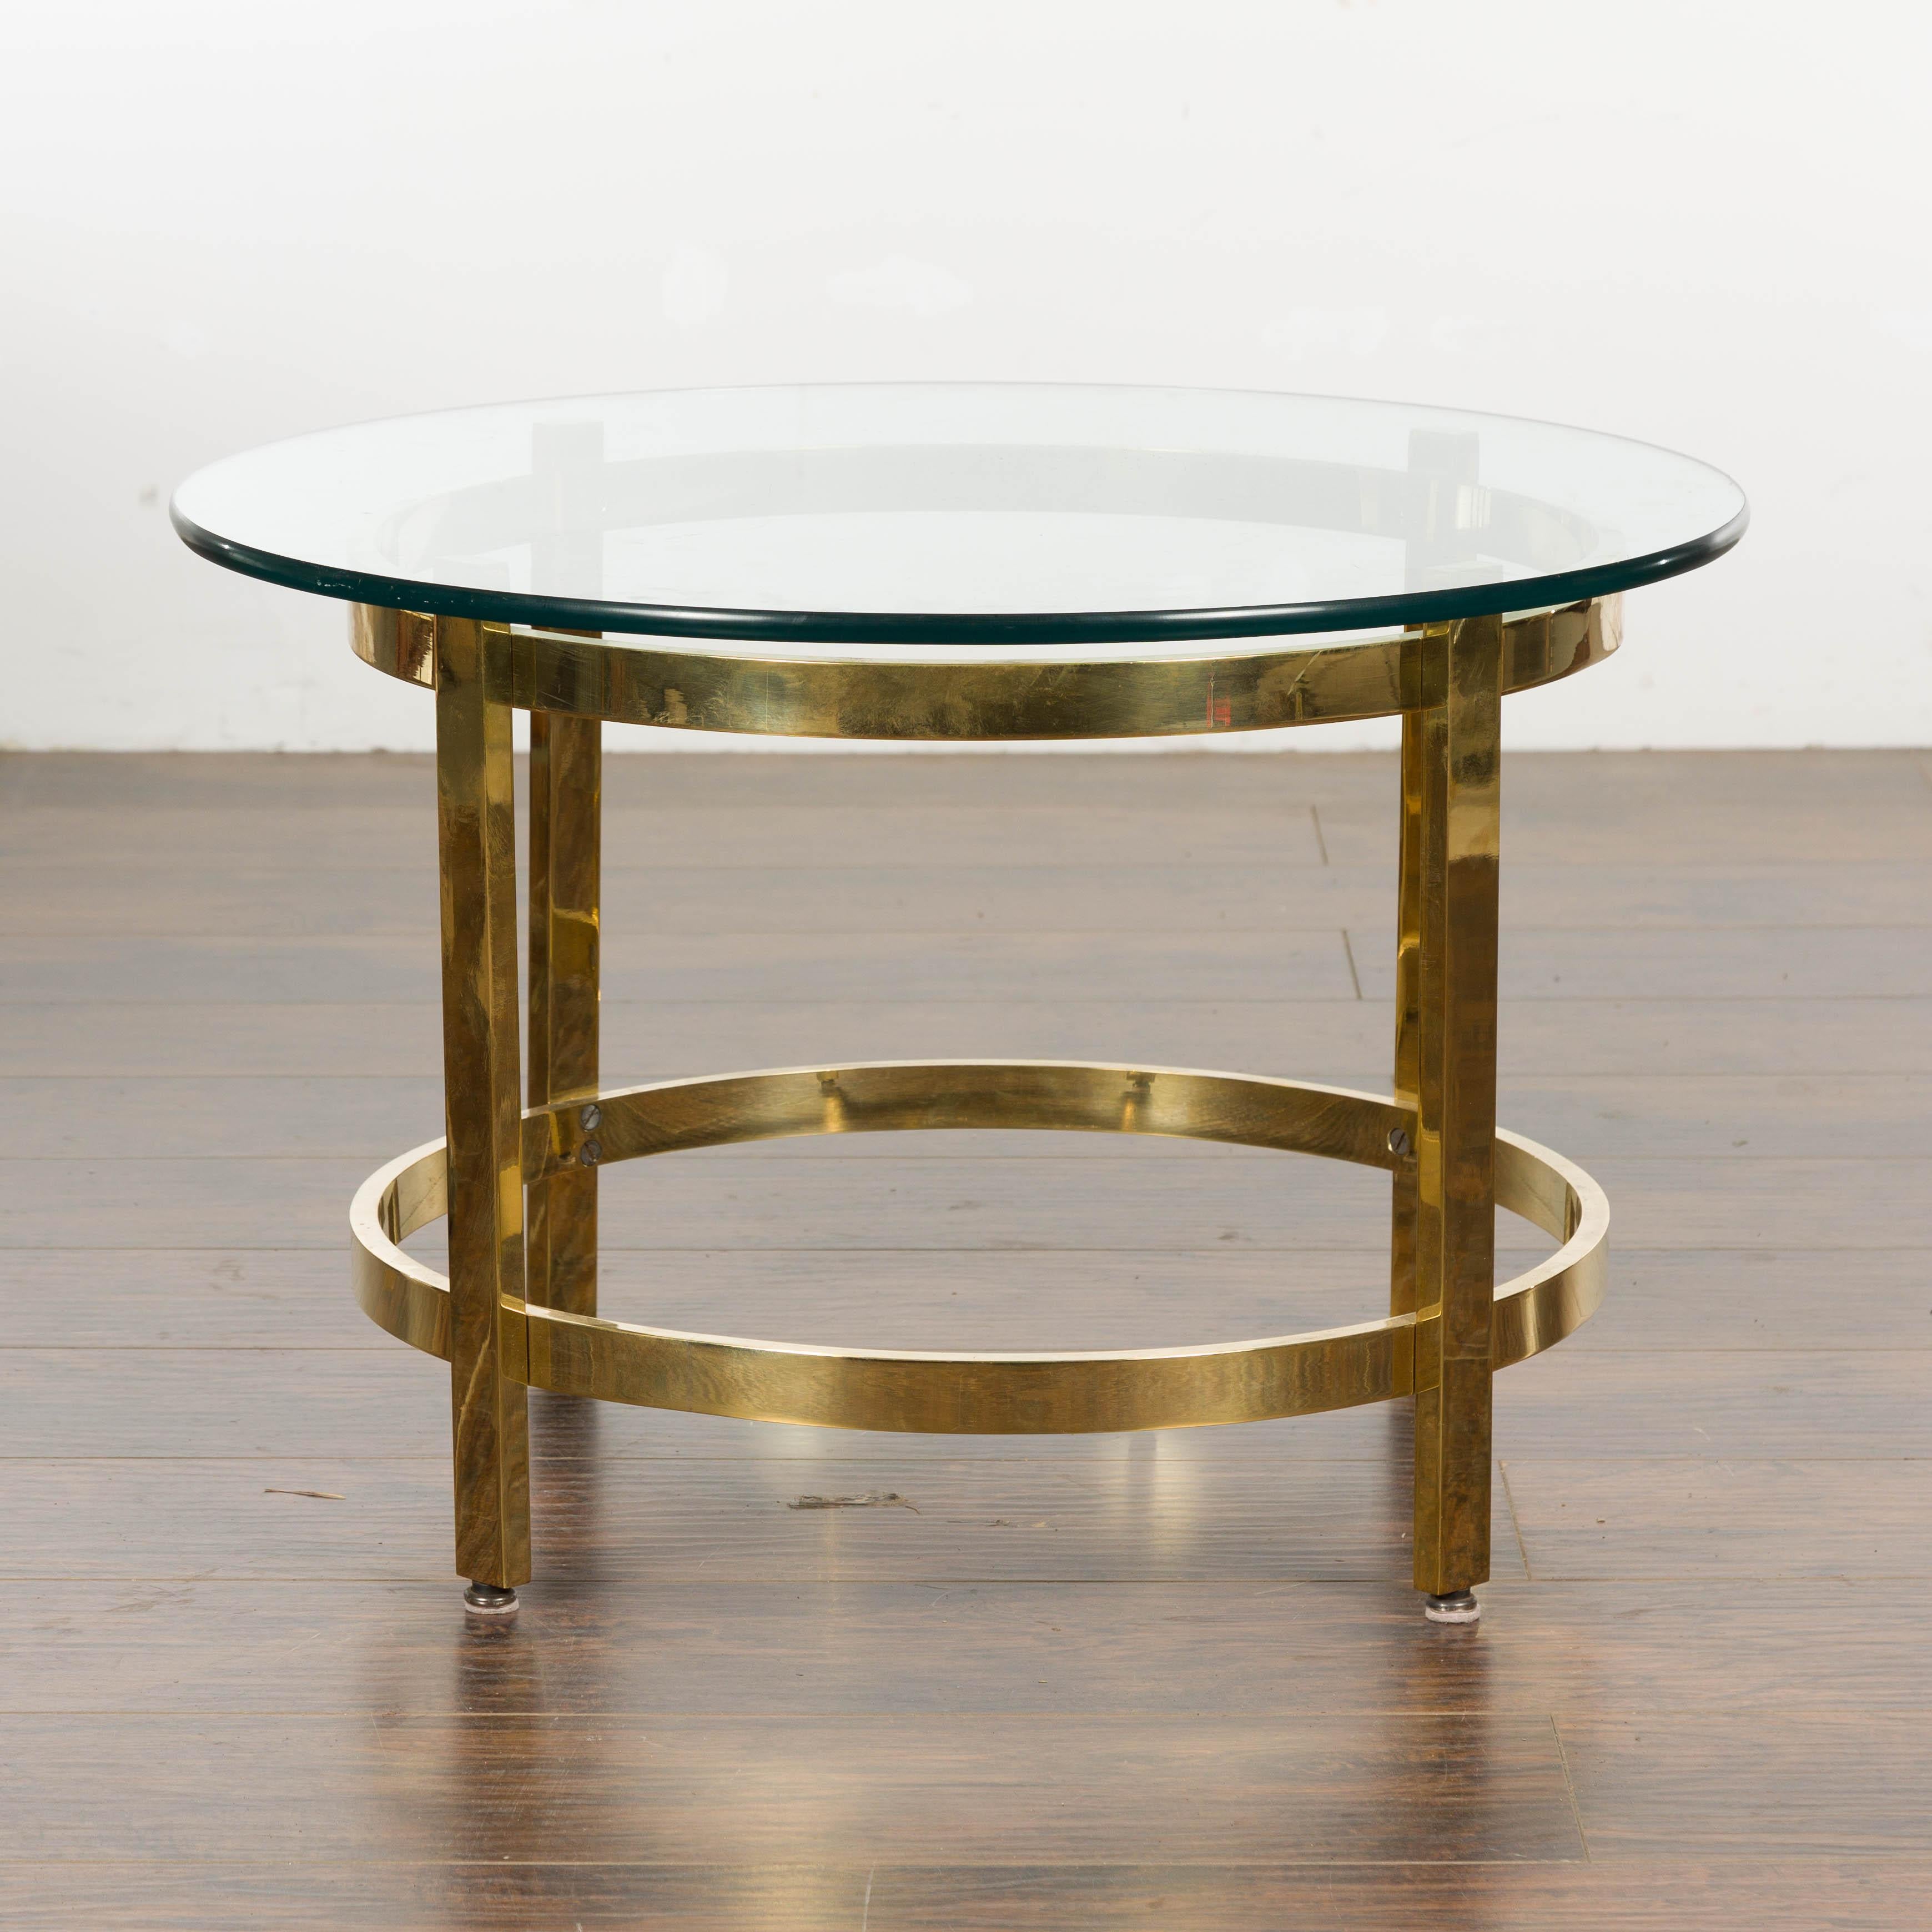 An Italian Midcentury brass side table from circa 1950 with circular glass top. Indulge in the elegance of the 1950s with this Italian Midcentury brass side table, a manifestation of timeless design and suave style. Merging the functionality of a